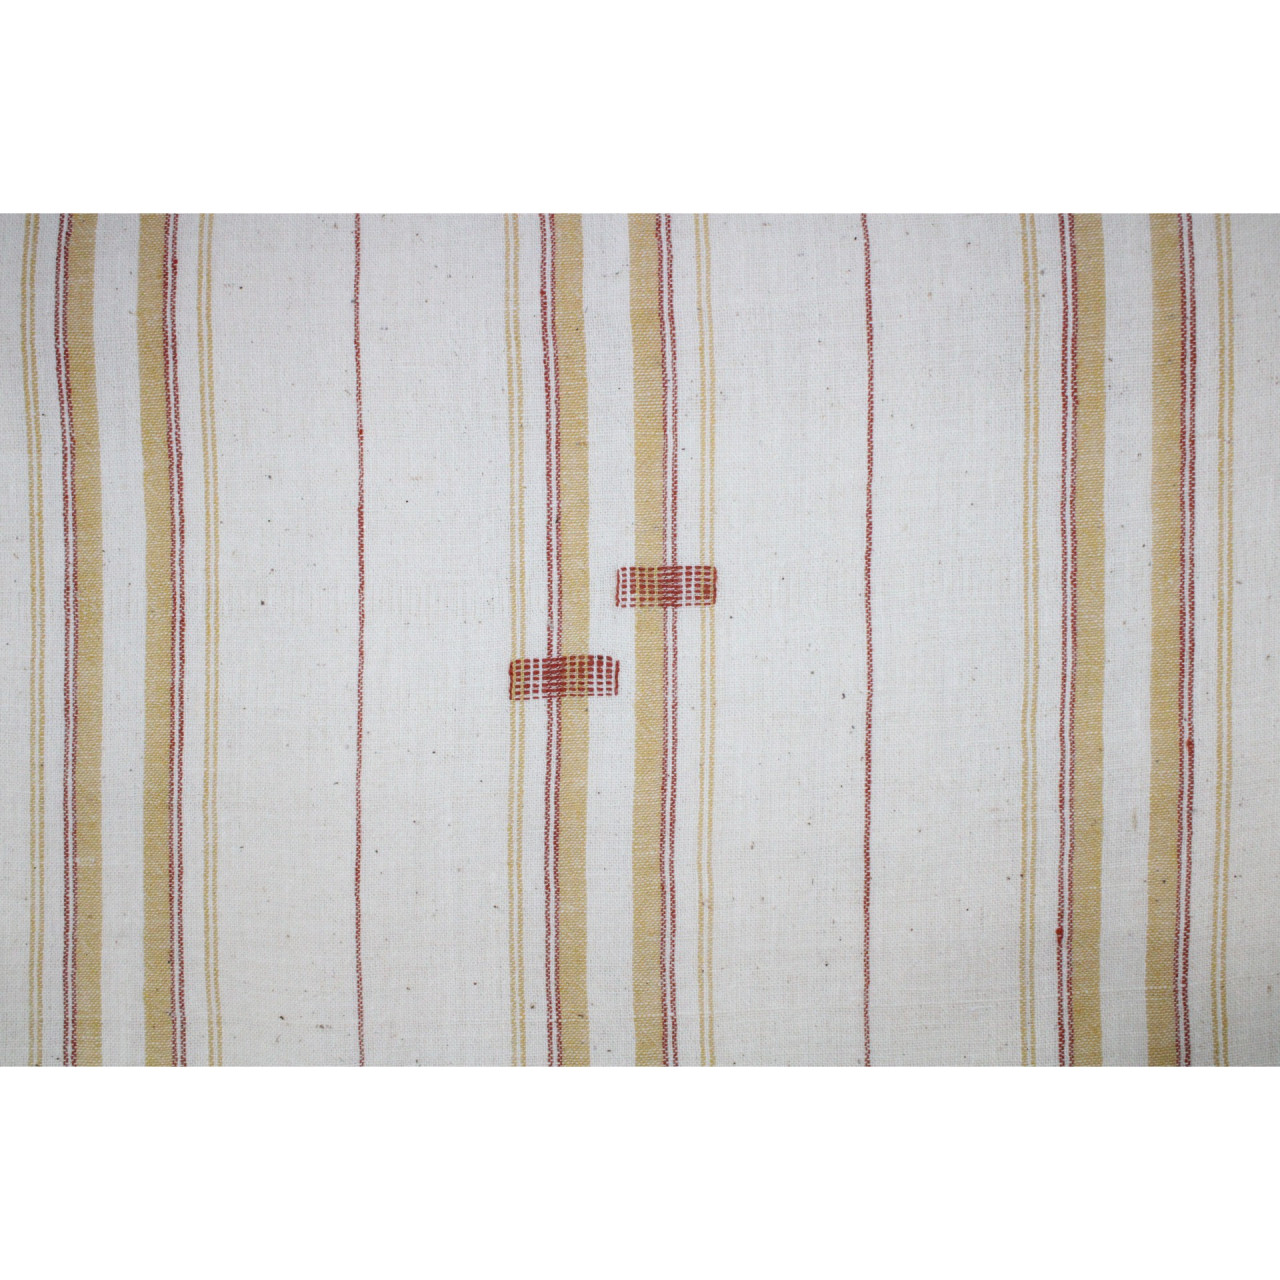 (1966) Kala cotton Azo-free dyed Kutchy yardage from Kutch with motifs and extra-weft - White, red, mustard, stripes, motif